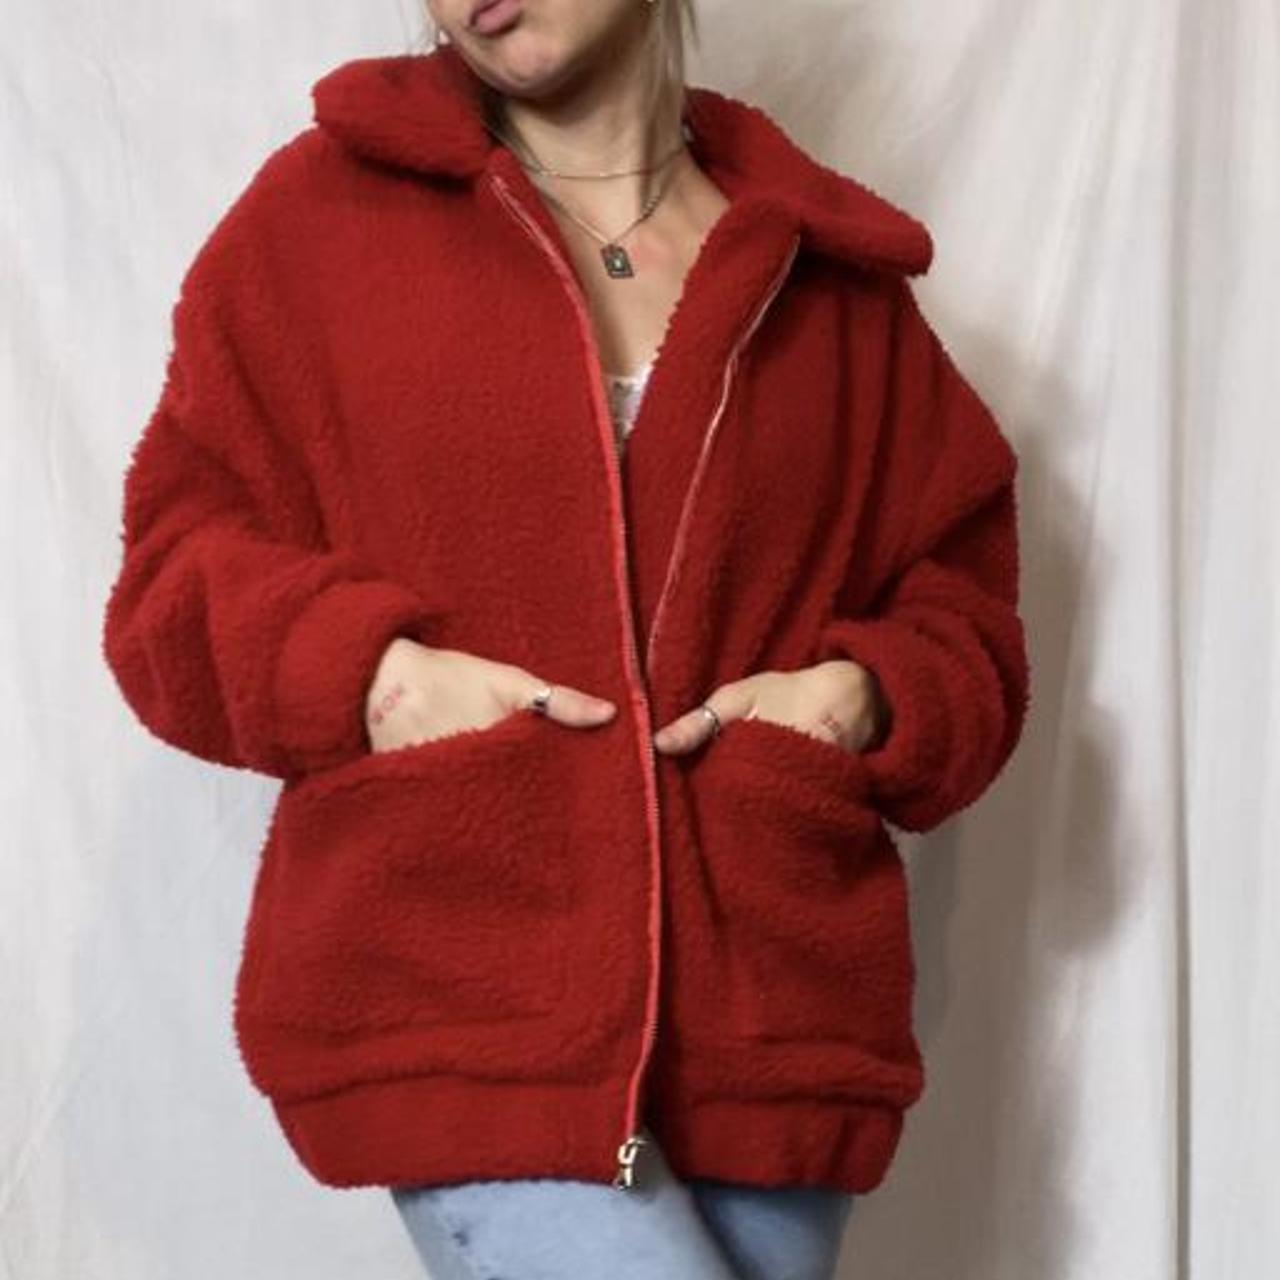 I.am.gia. Pixie jacket/ coat in more rare color red.... - Depop